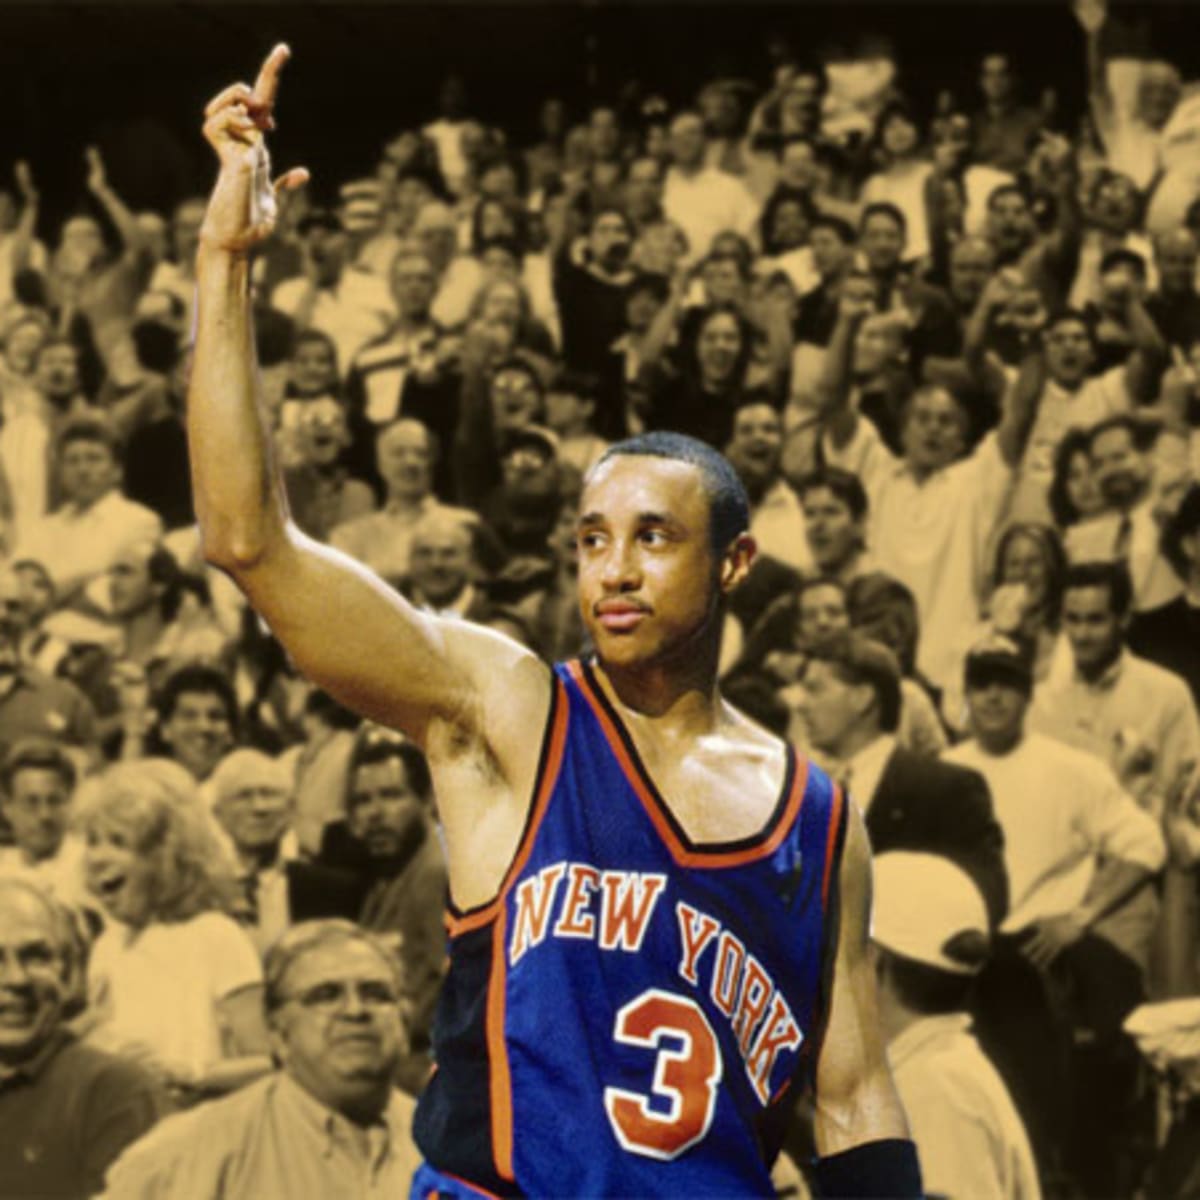 Knicks Legend John Starks Assists in Just Collect's Grand Opening